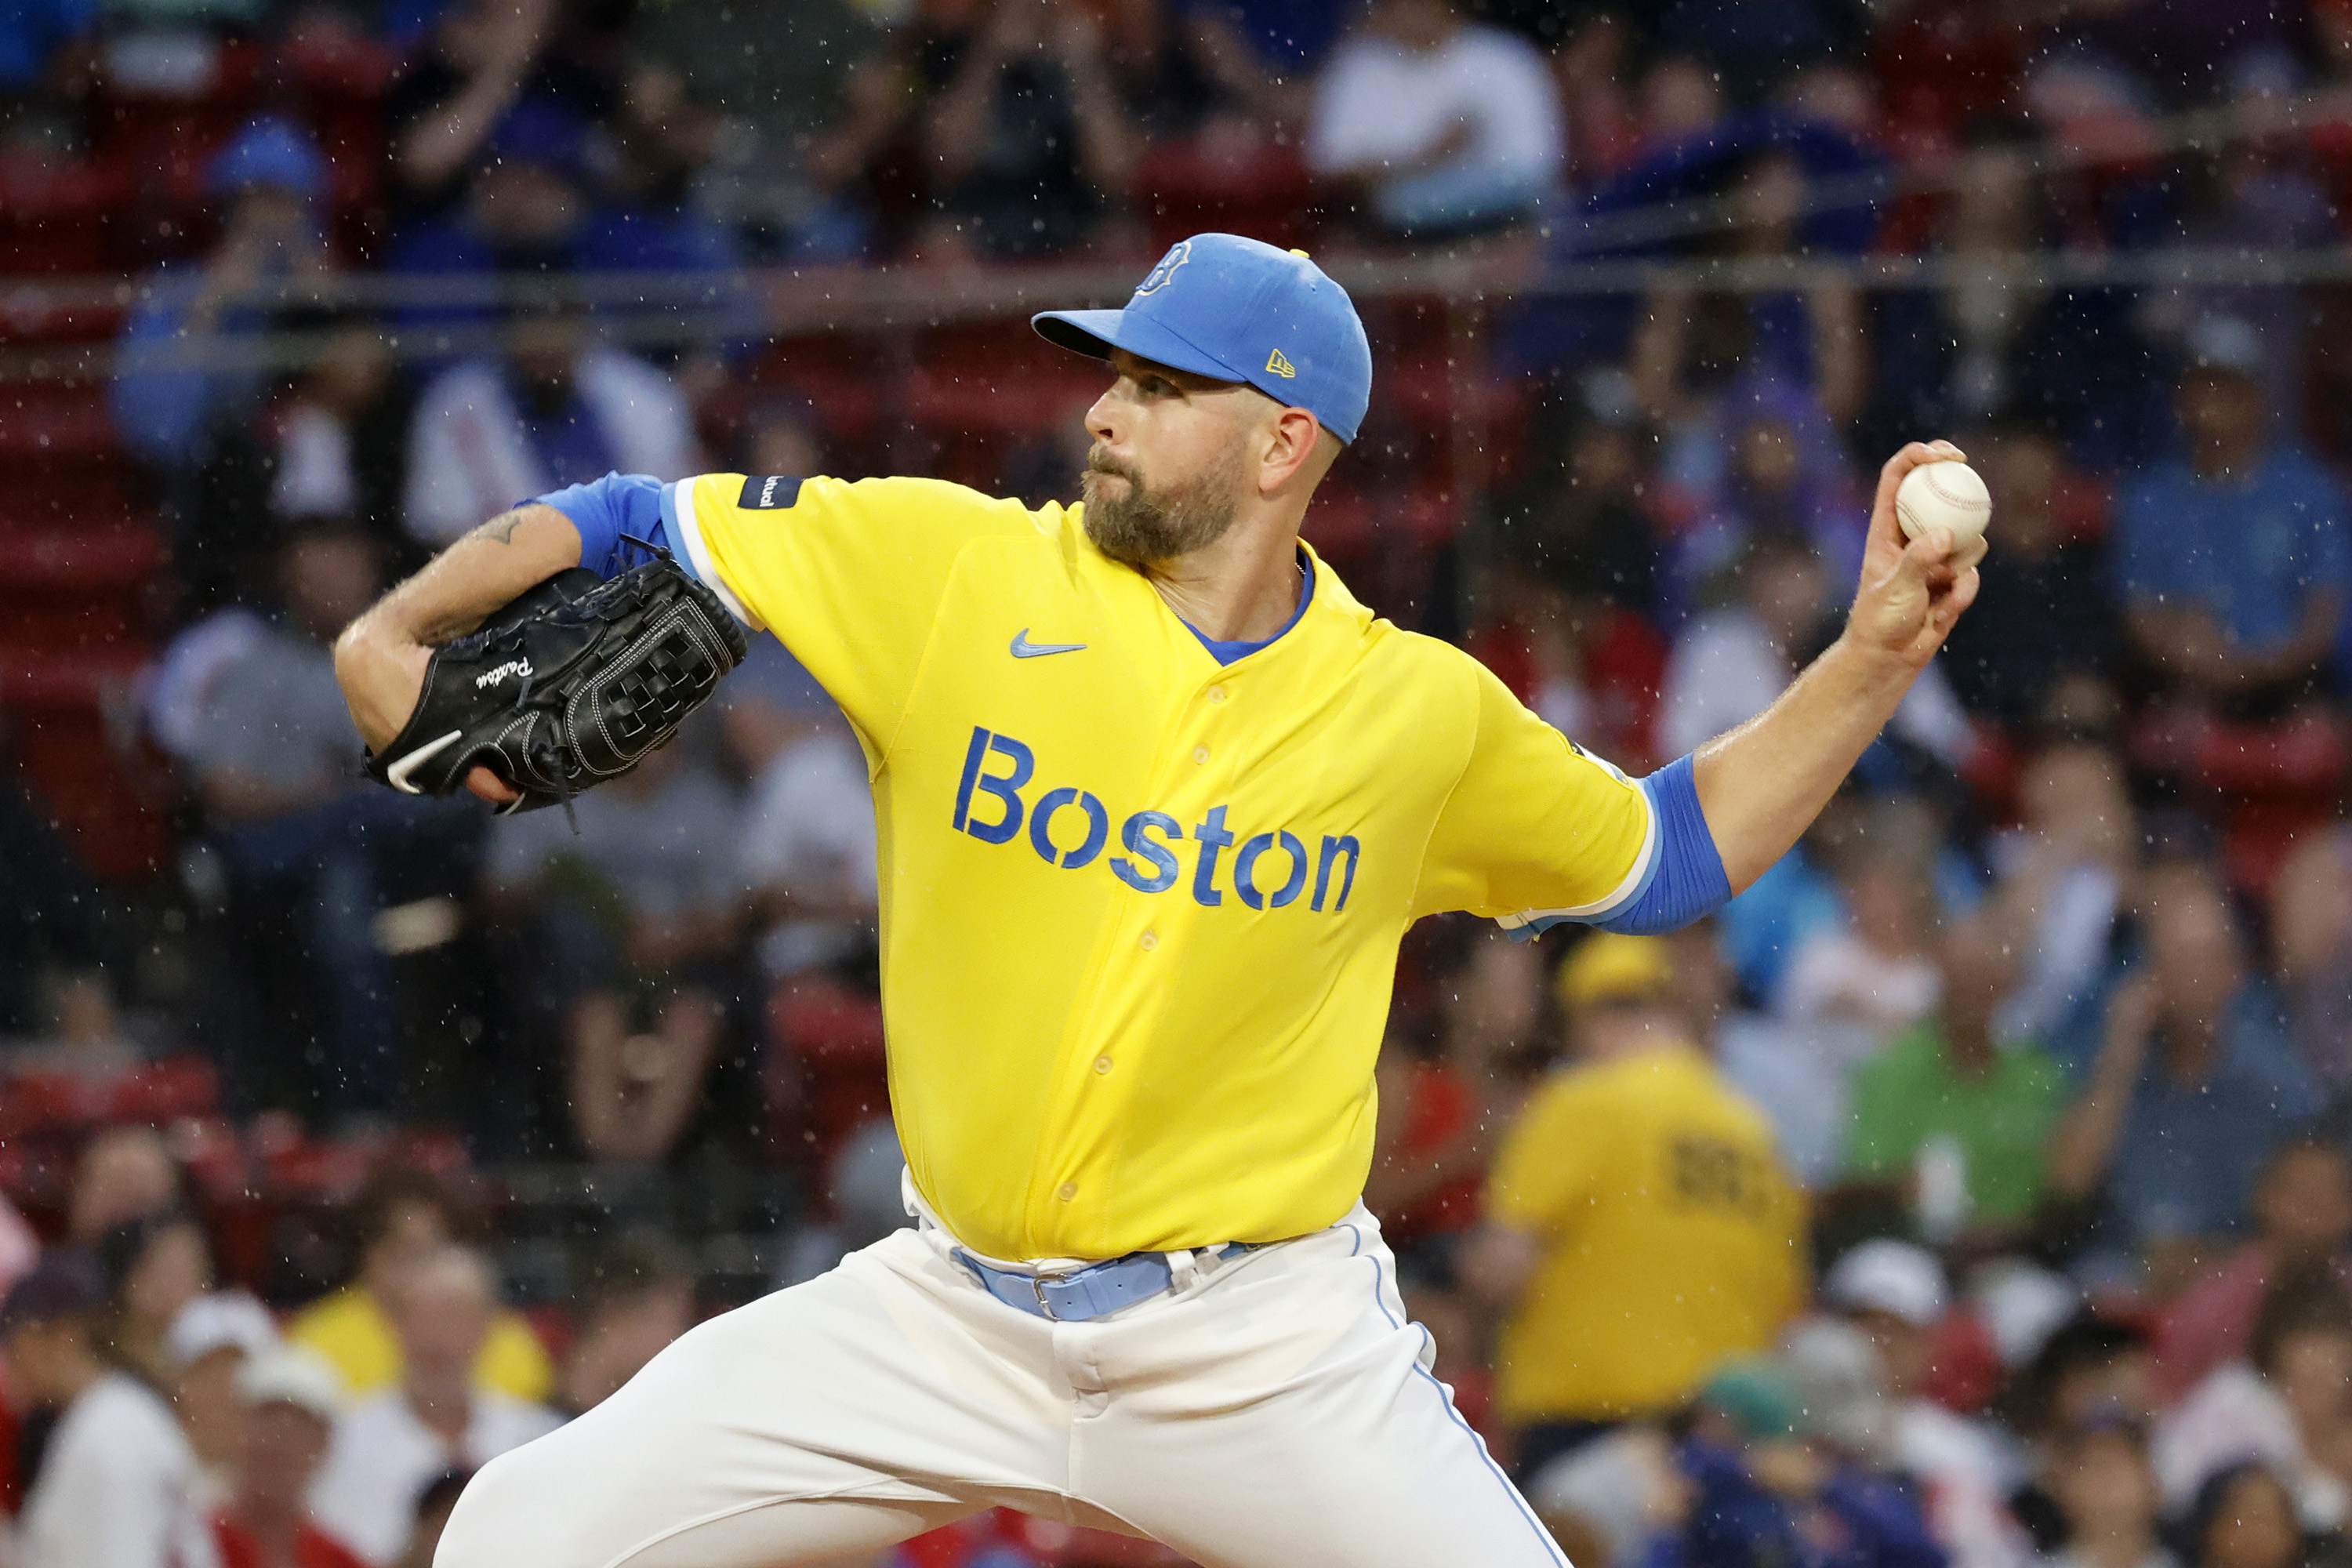 Will Boston Red Sox keep wearing yellow and blue uniforms during